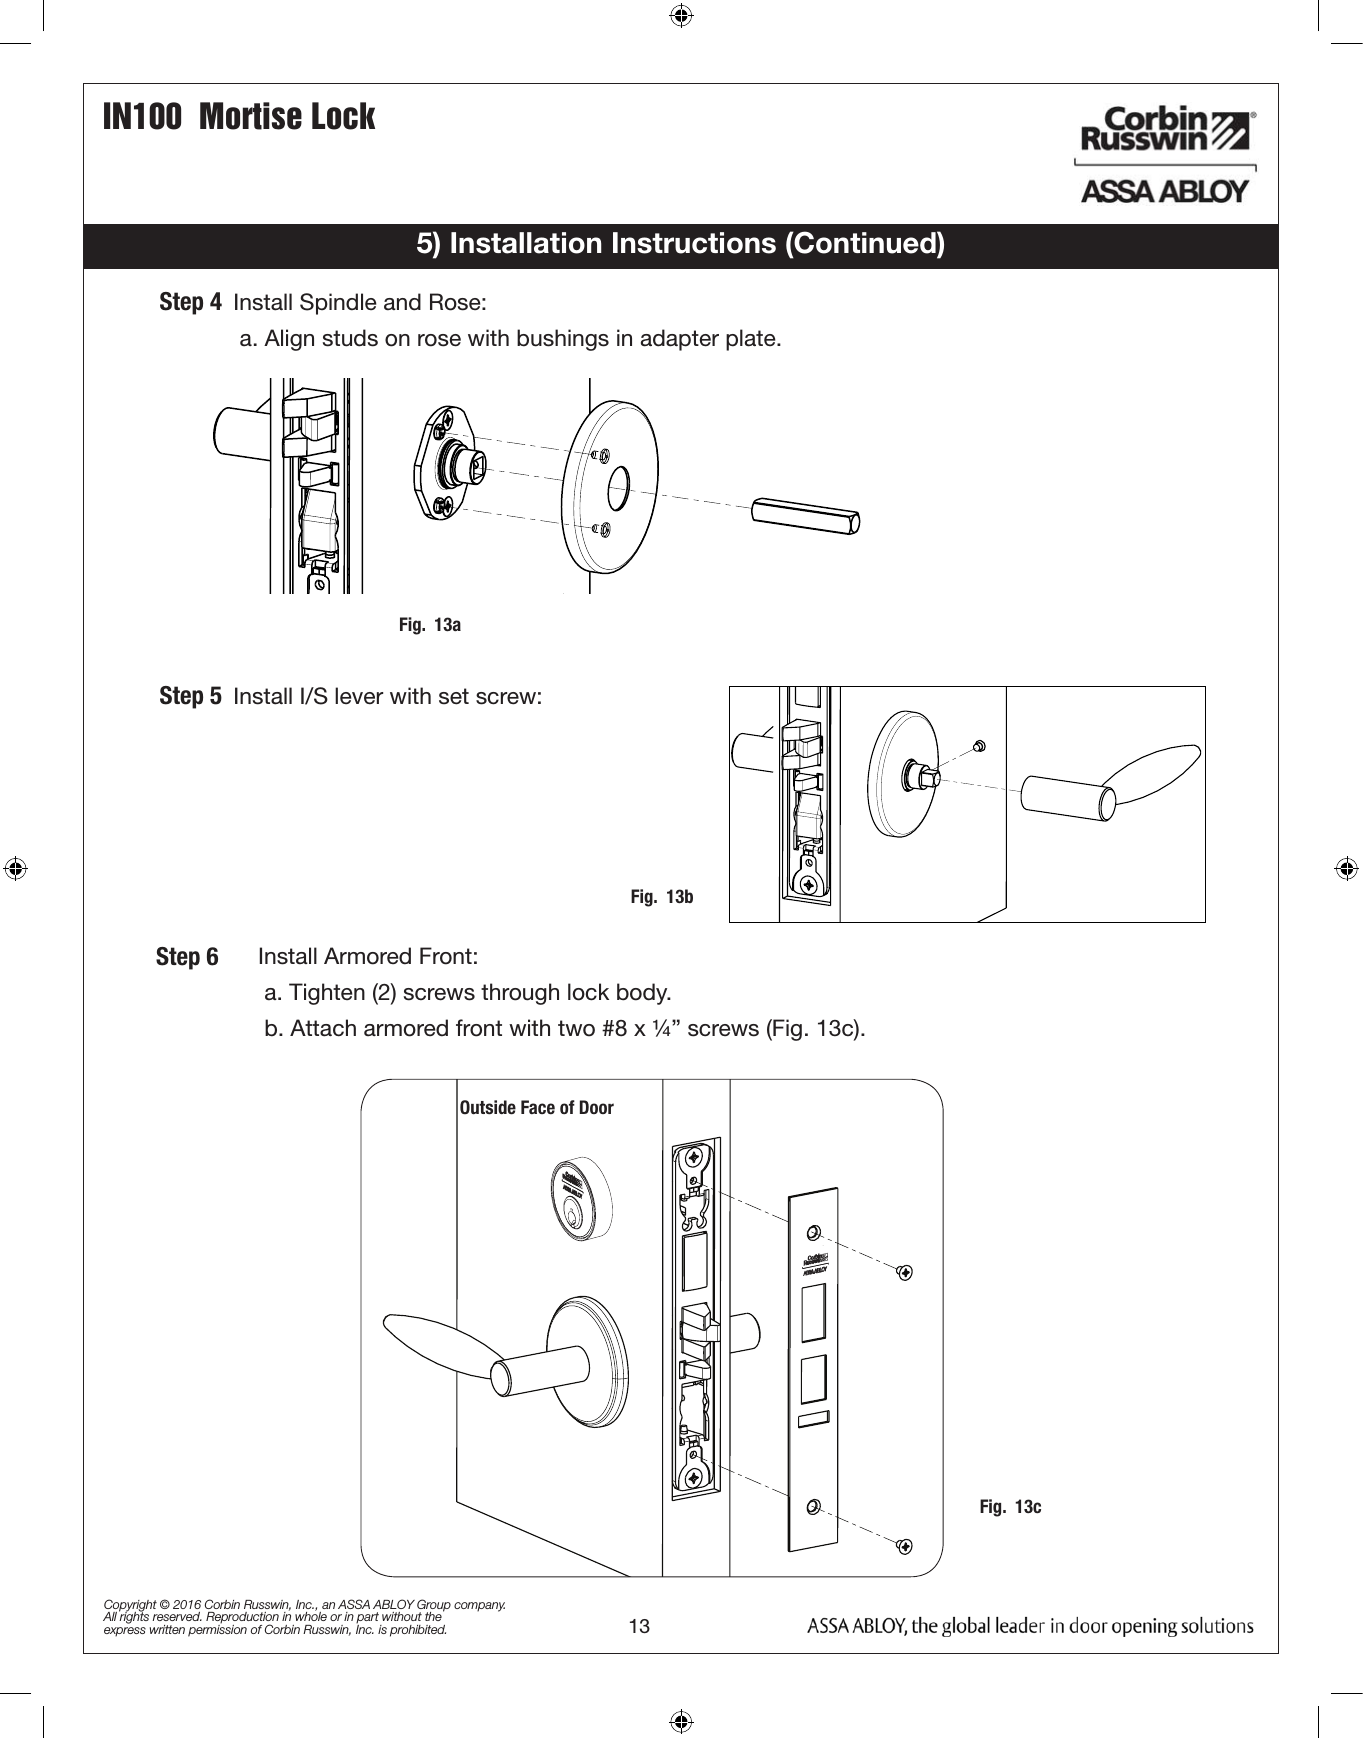 IN100  Mortise Lock13Copyright © 2016 Corbin Russwin, Inc., an ASSA ABLOY Group company. All rights reserved. Reproduction in whole or in part without the express written permission of Corbin Russwin, Inc. is prohibited.5) Installation Instructions (Continued)   Install Armored Front:a. Tighten (2) screws through lock body.b. Attach armored front with two #8 x ¼” screws (Fig. 13c).   Install Spindle and Rose:a. Align studs on rose with bushings in adapter plate.   Install I/S lever with set screw:Step 4Step 5Step 6Outside Face of DoorFig.  13aFig.  13bFig.  13c